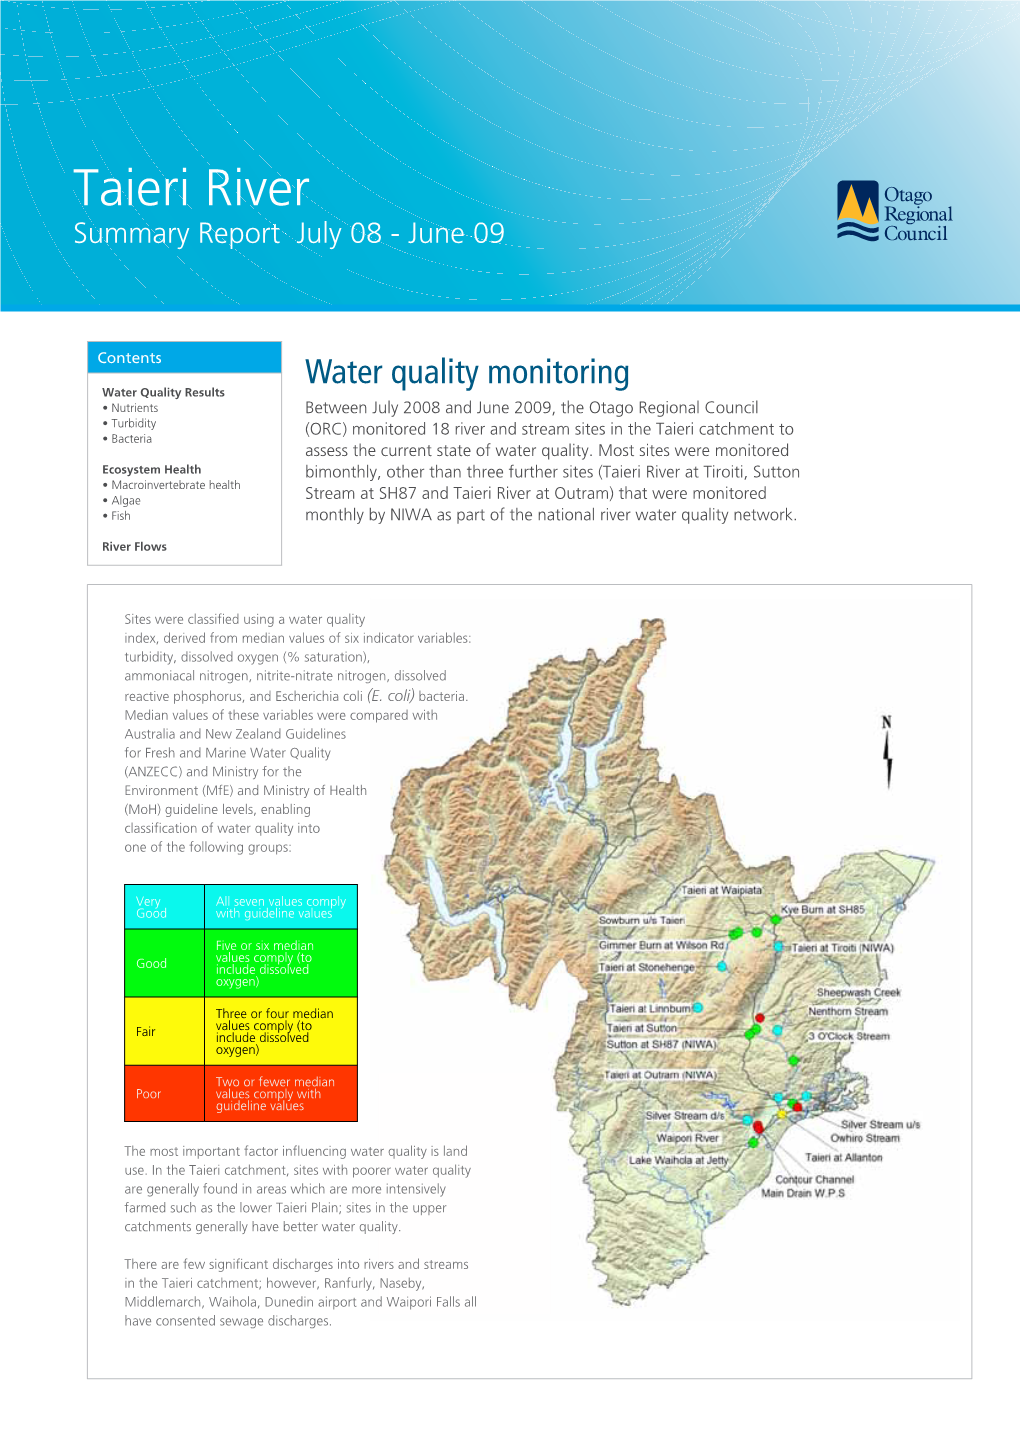 Taieri River Summary Report July 08 - June 09